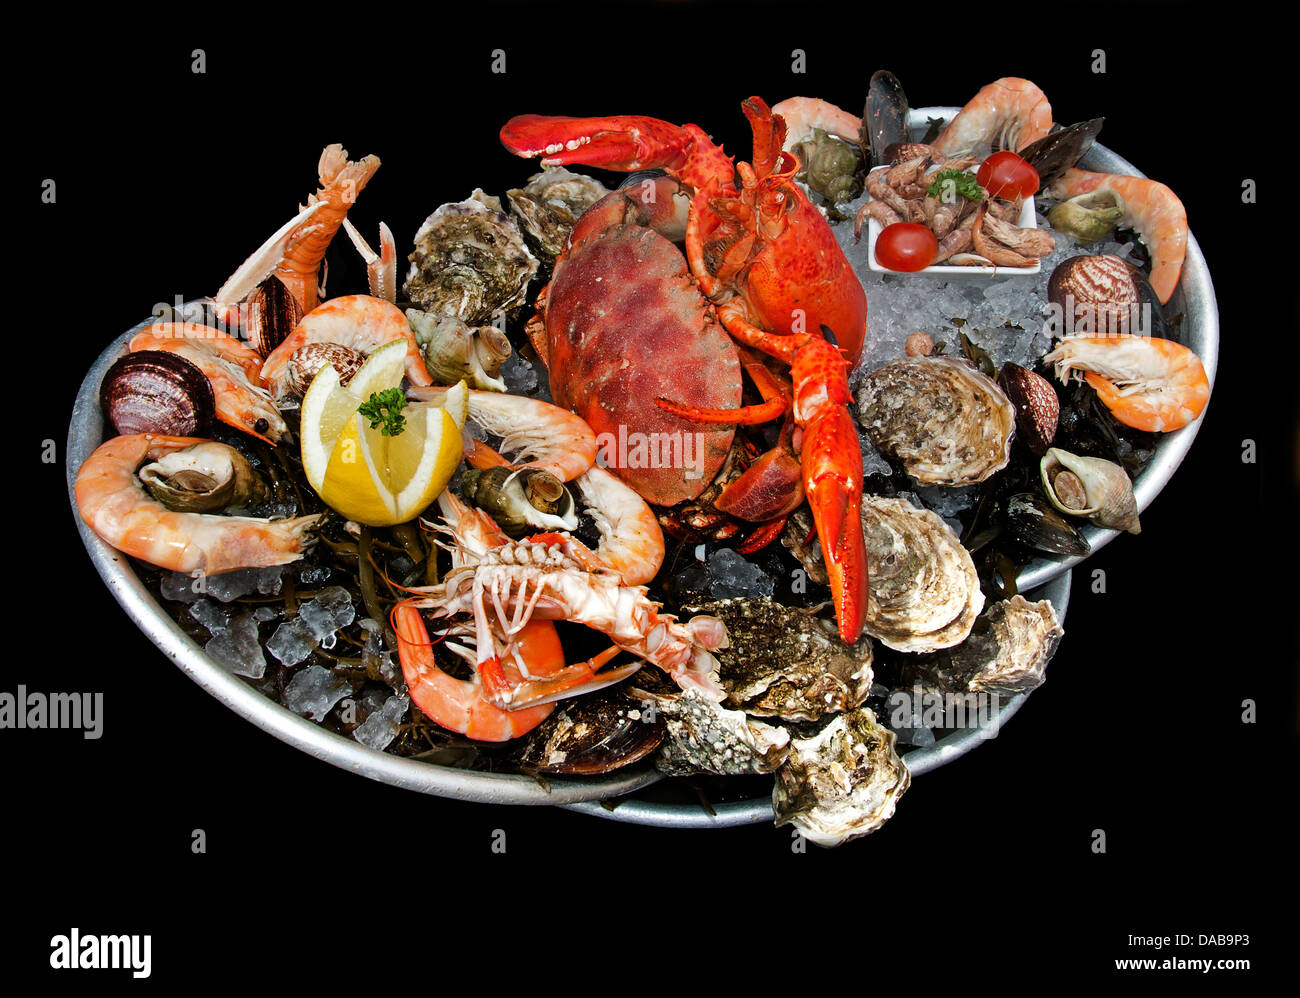 Fruits de mer French seafood Oysters Shrimp Lobster Periwinkle Crab Prawns Langoustine Mussels Scallops Clams Stock Photo